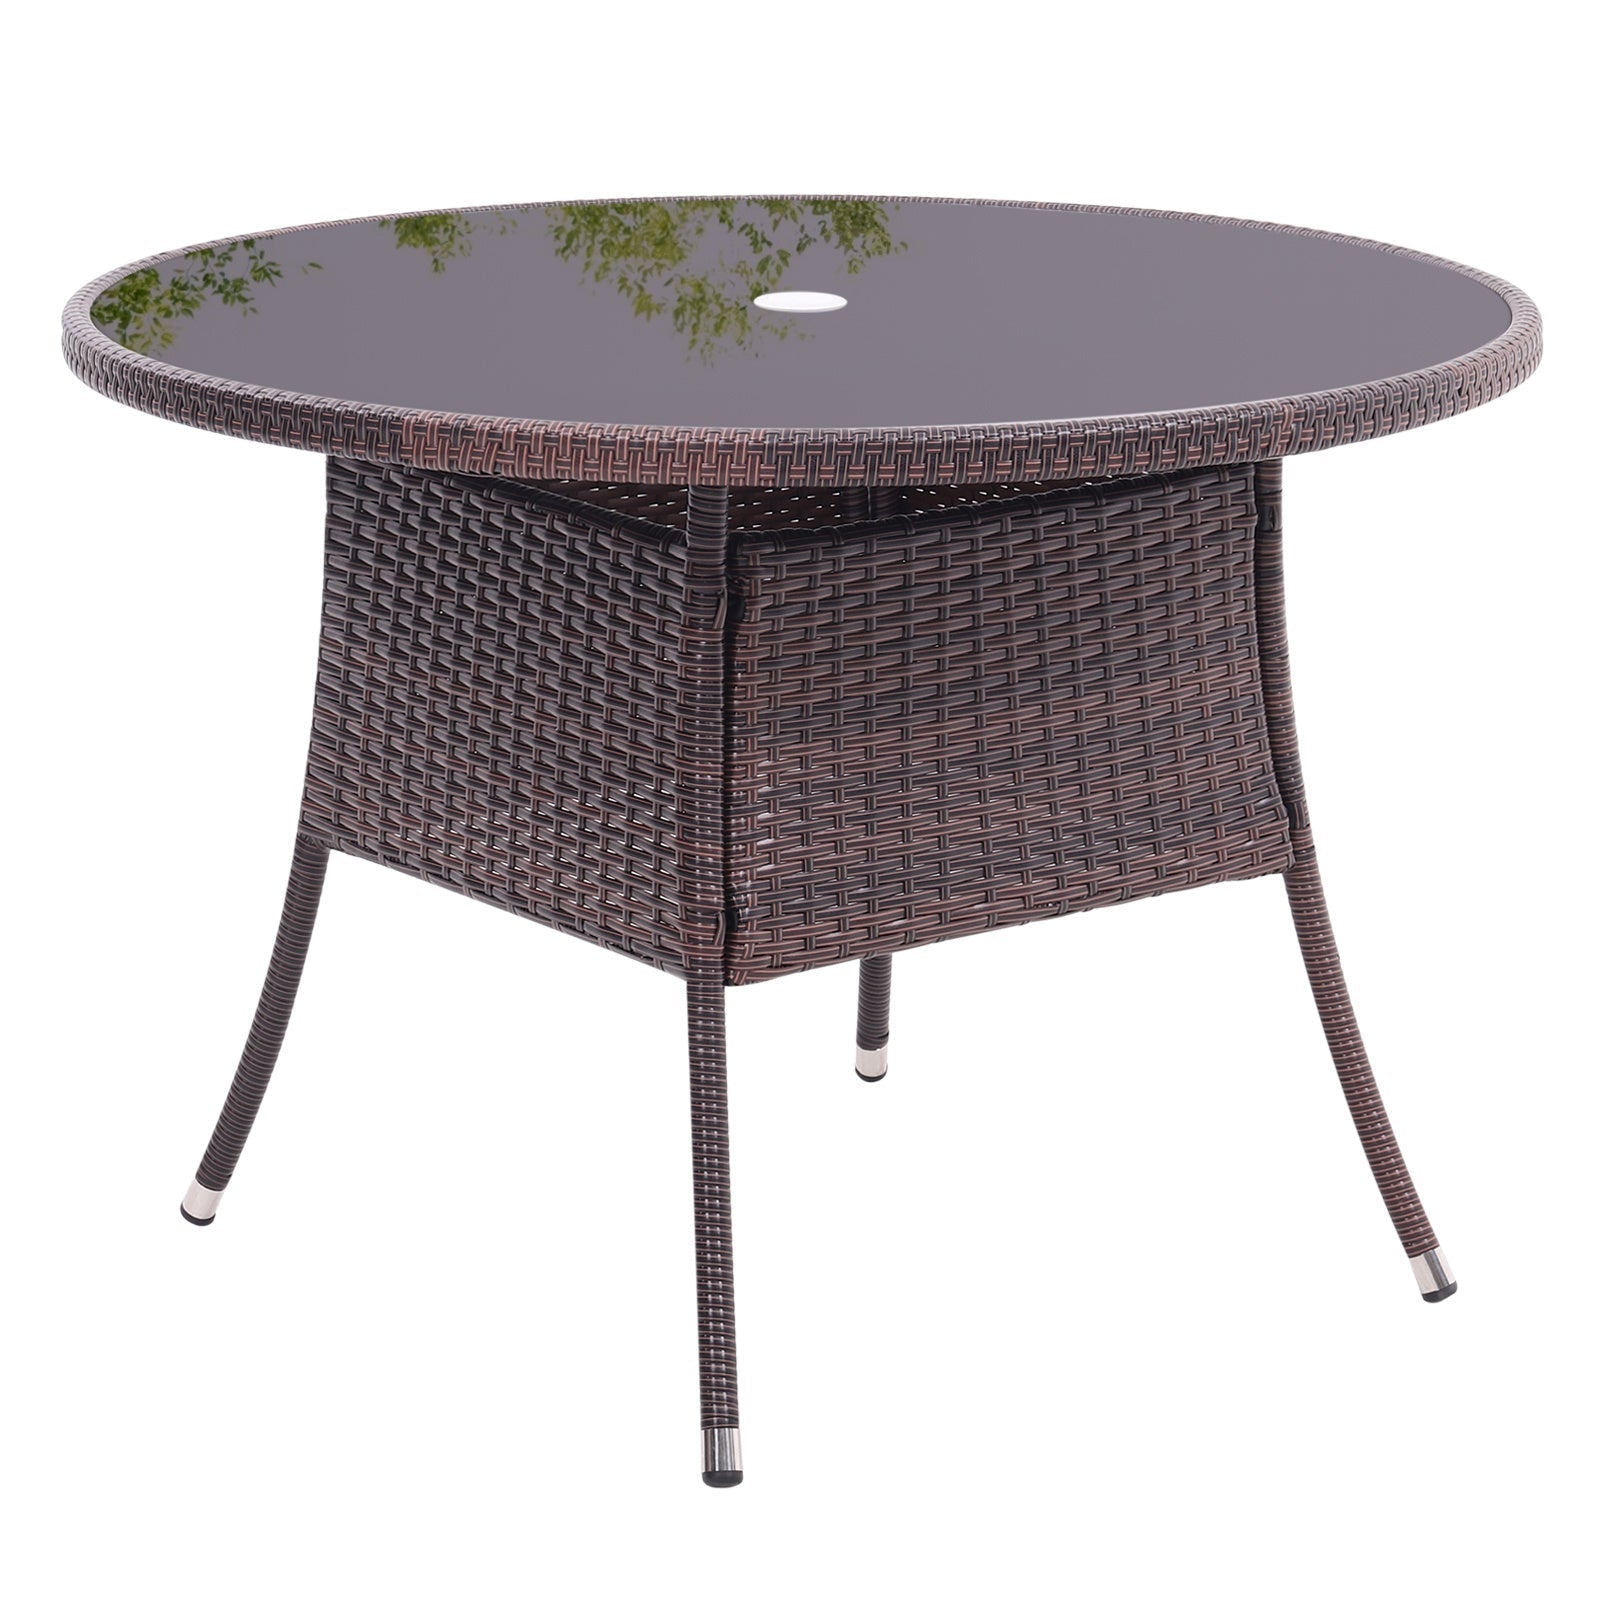 105cm Round/ Square Coffee Table Bistro Outdoor Garden Patio Tables & Parasol Hole Garden Dining Table   Round Brown 